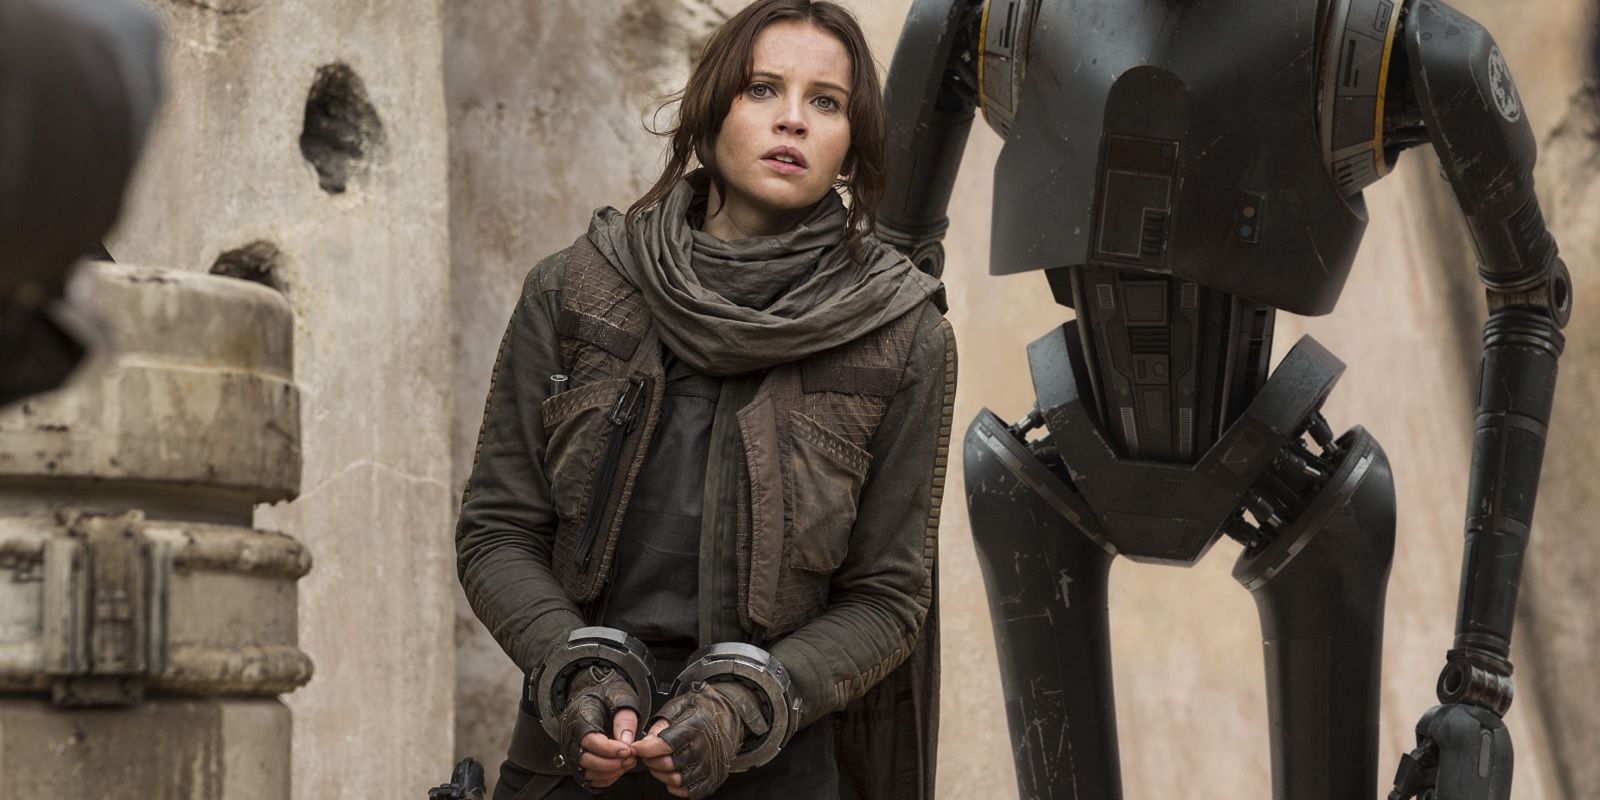 Jyn standing with her hands cuffed and K-2SO behind her in Rogue One: A Star Wars Story